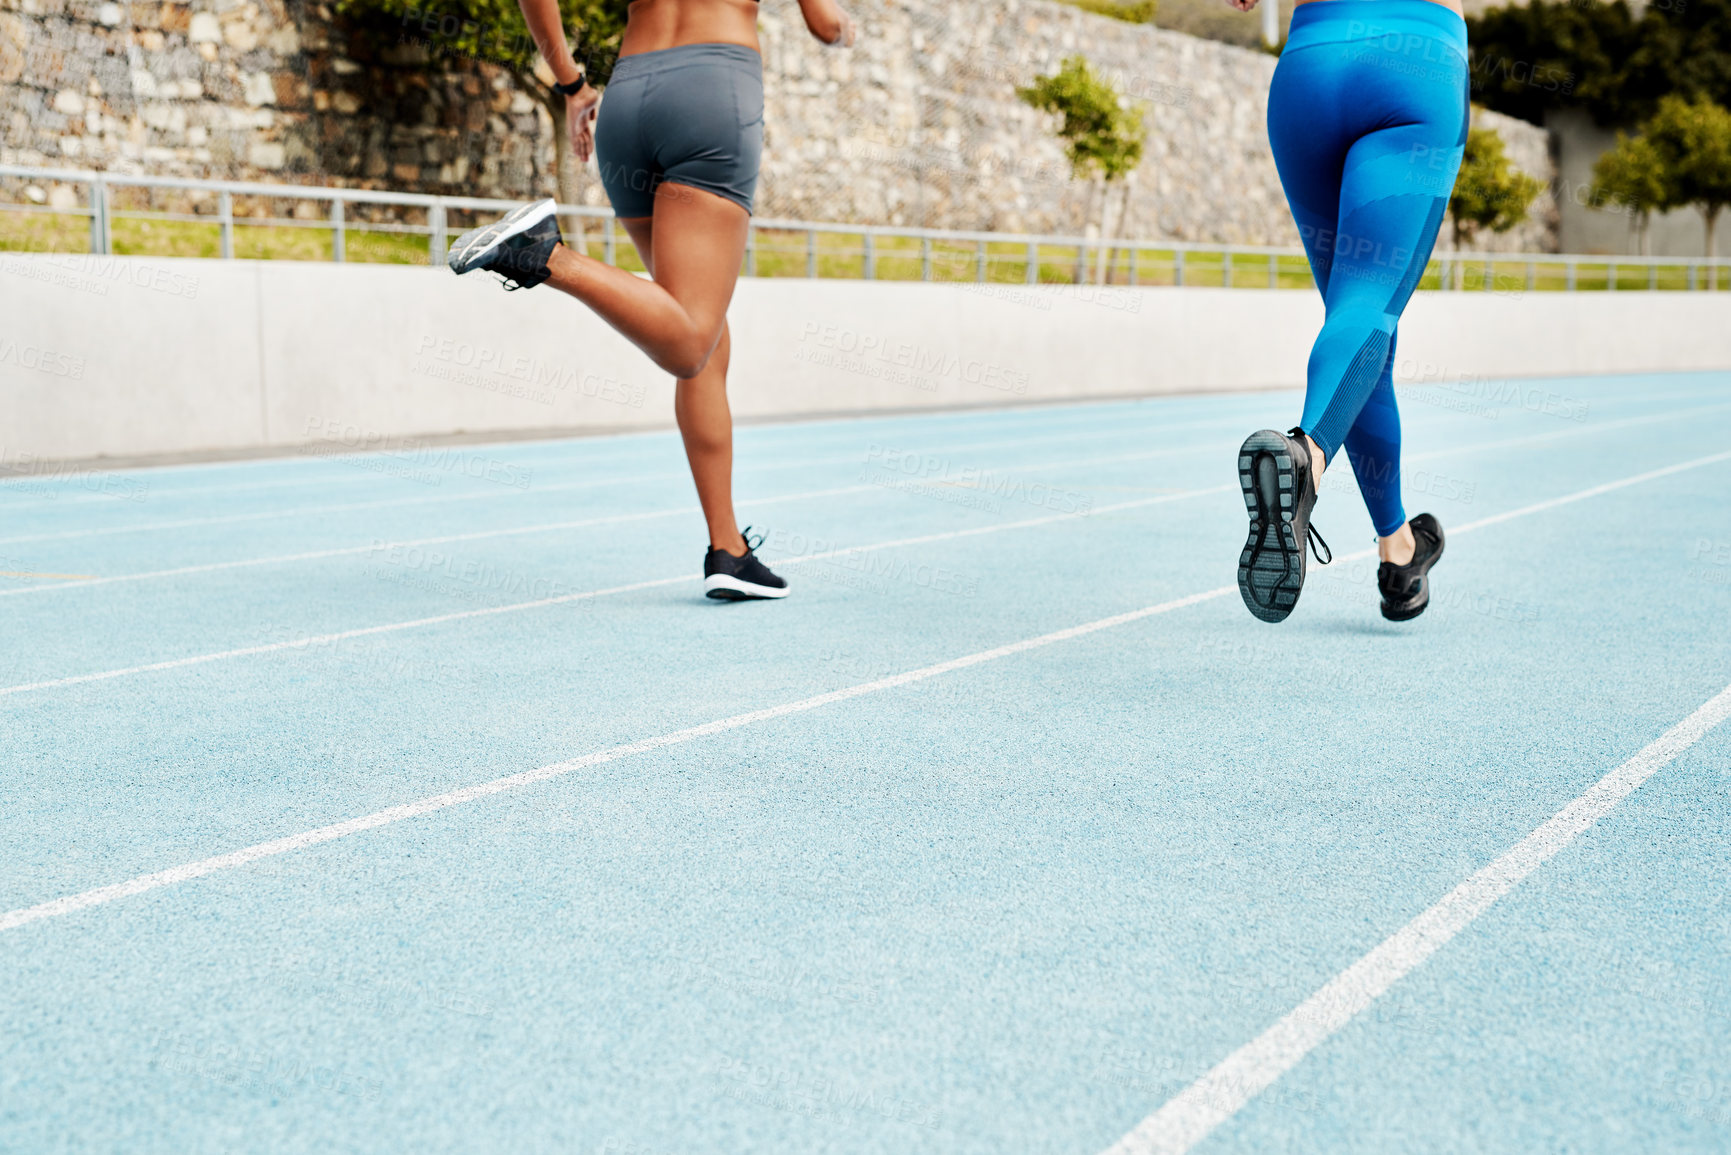 Buy stock photo Cropped shot of two unrecognizable athletes running along a track field alone during an outdoor workout session